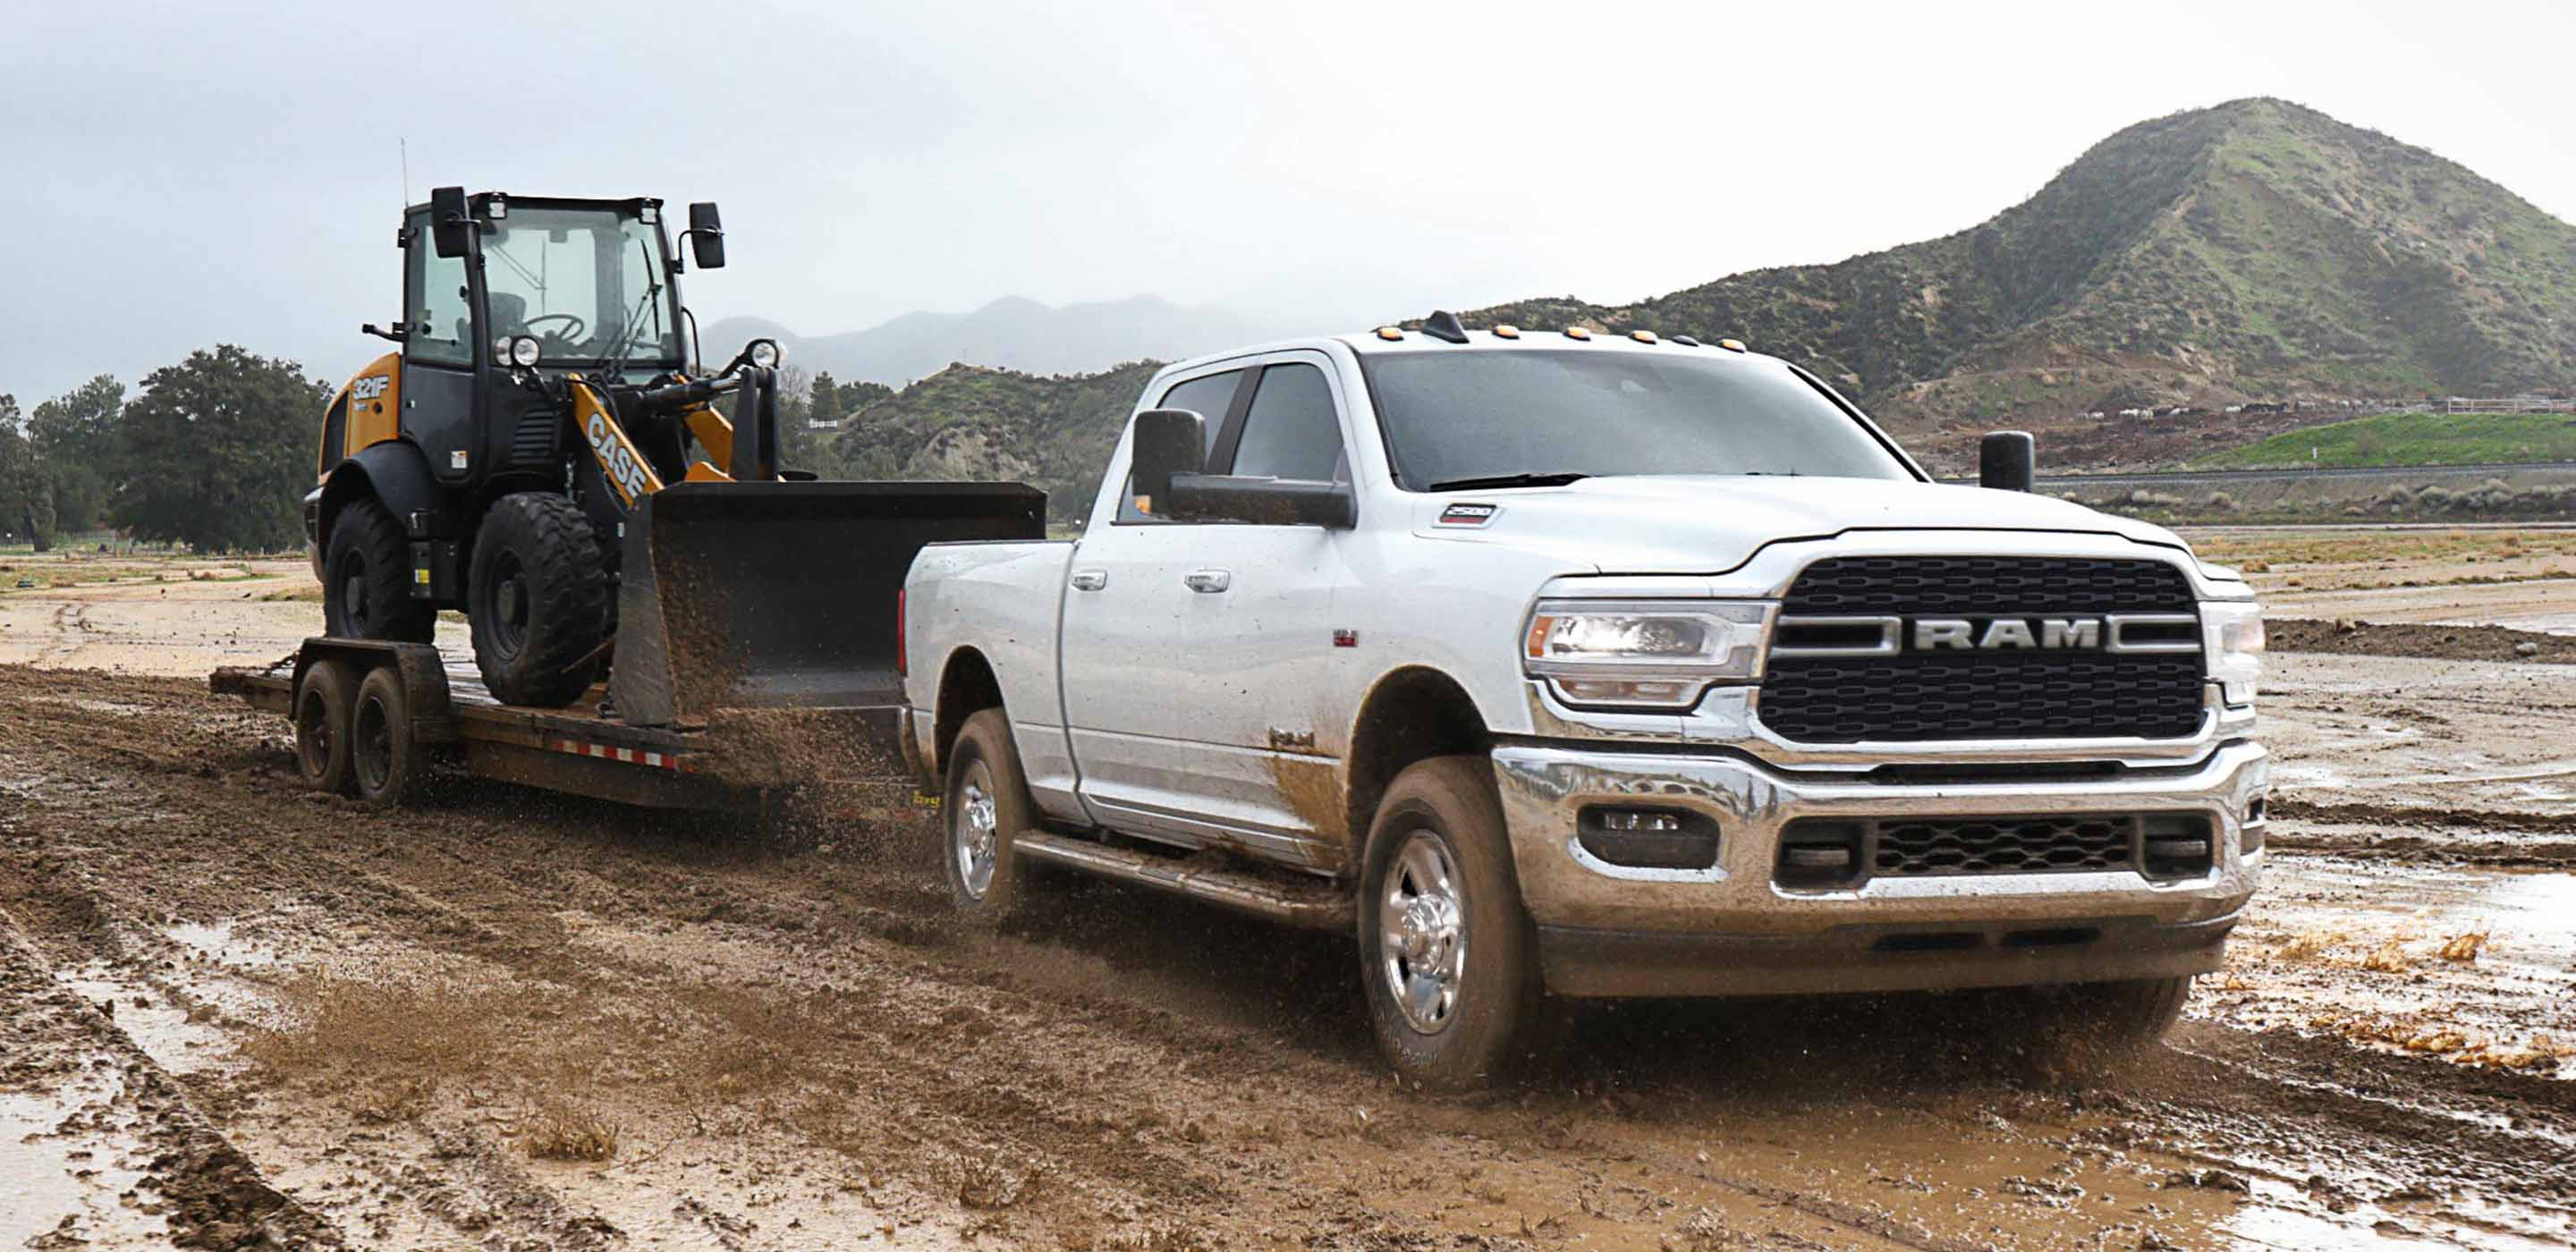 Display The 2022 Ram 2500 towing a flatbed trailer with an excavator on it through a muddy field.